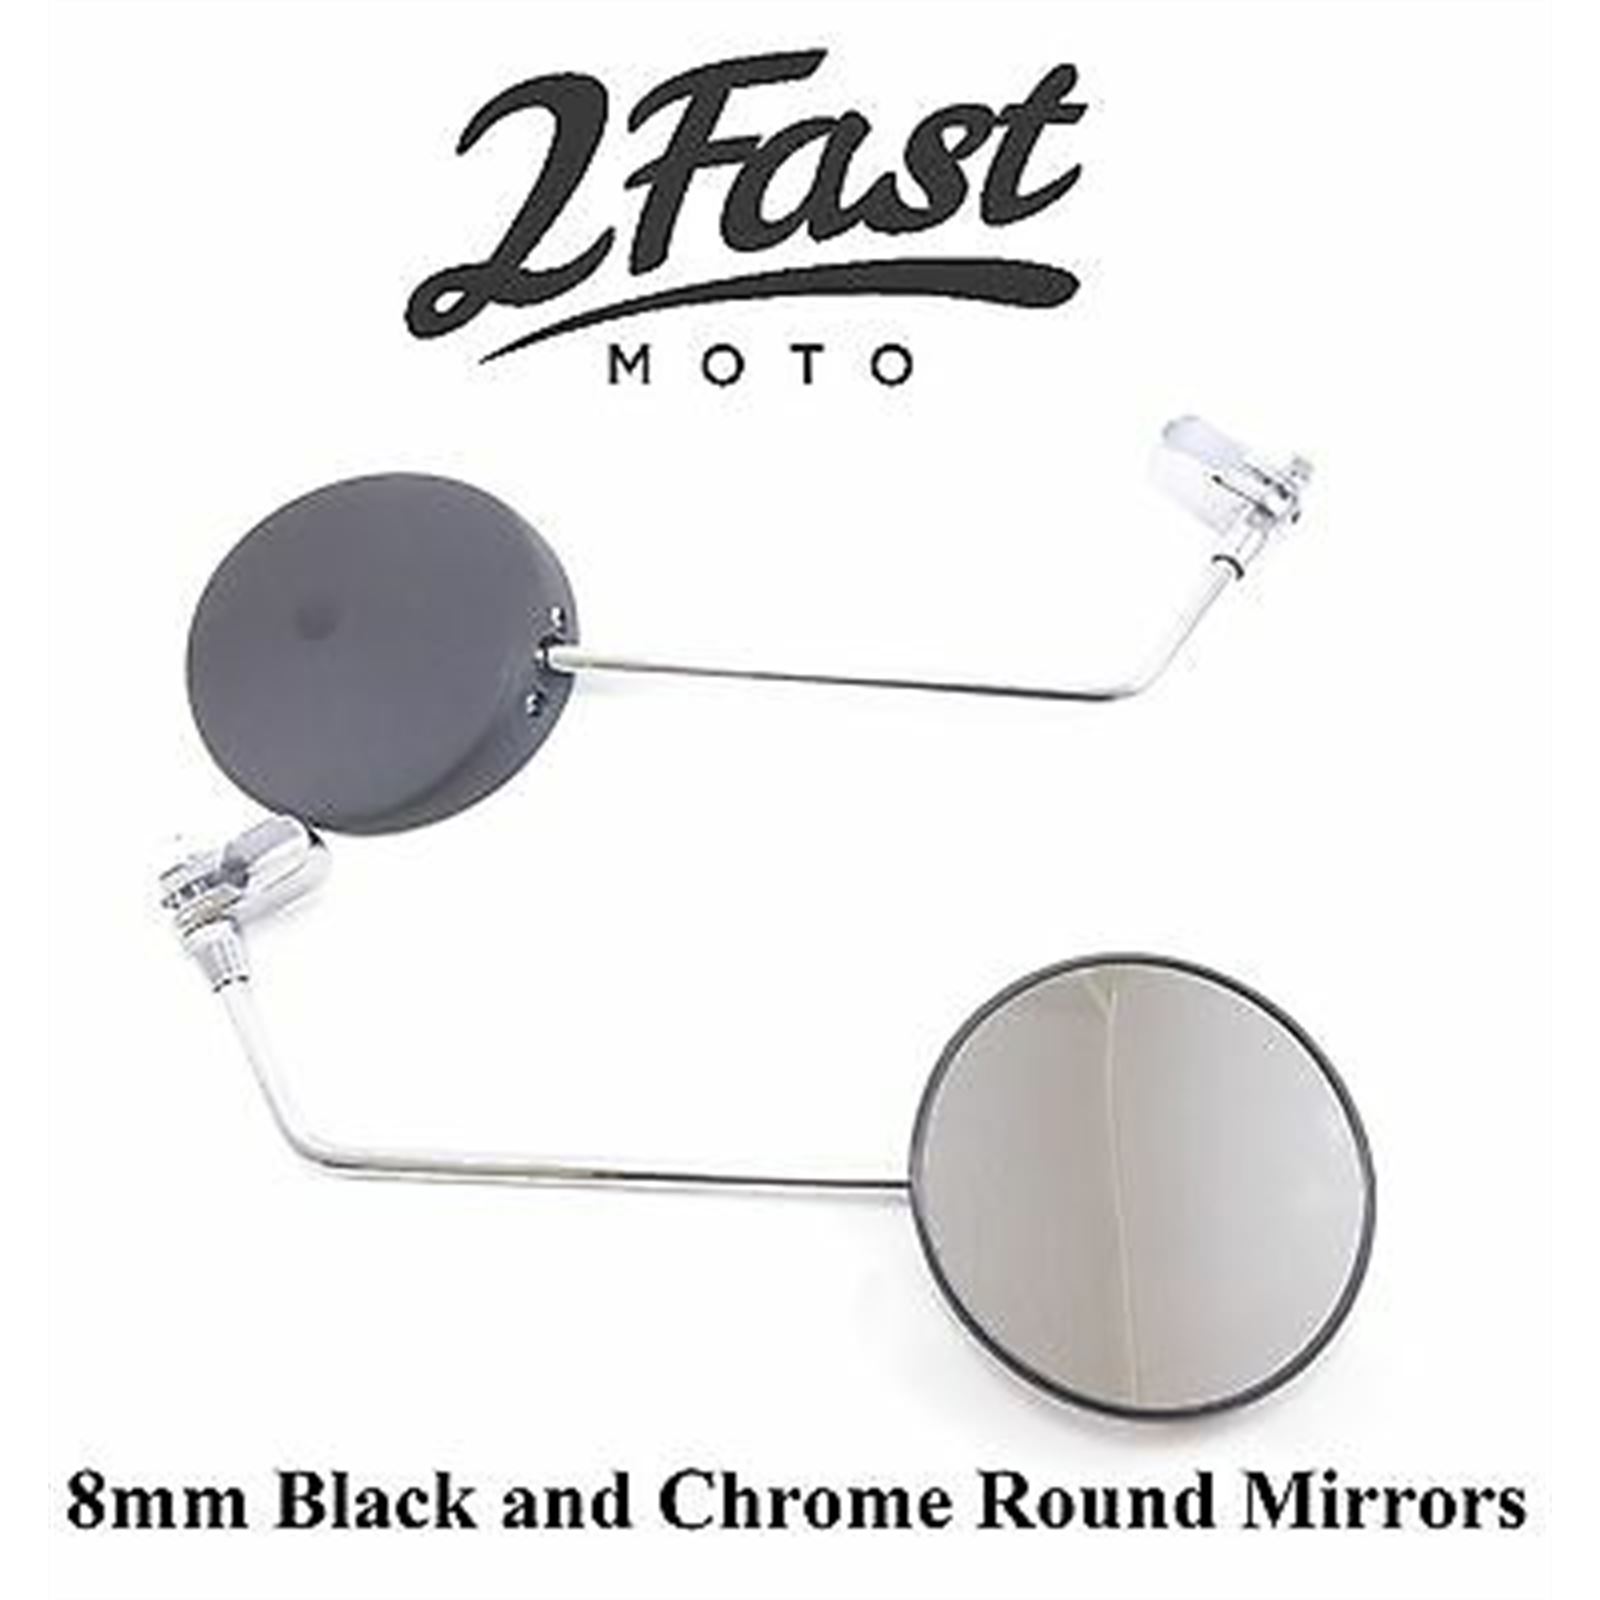 8mm Stem Round Mirror Pair with Handlebar Mounts for Motorcycles 20-64510